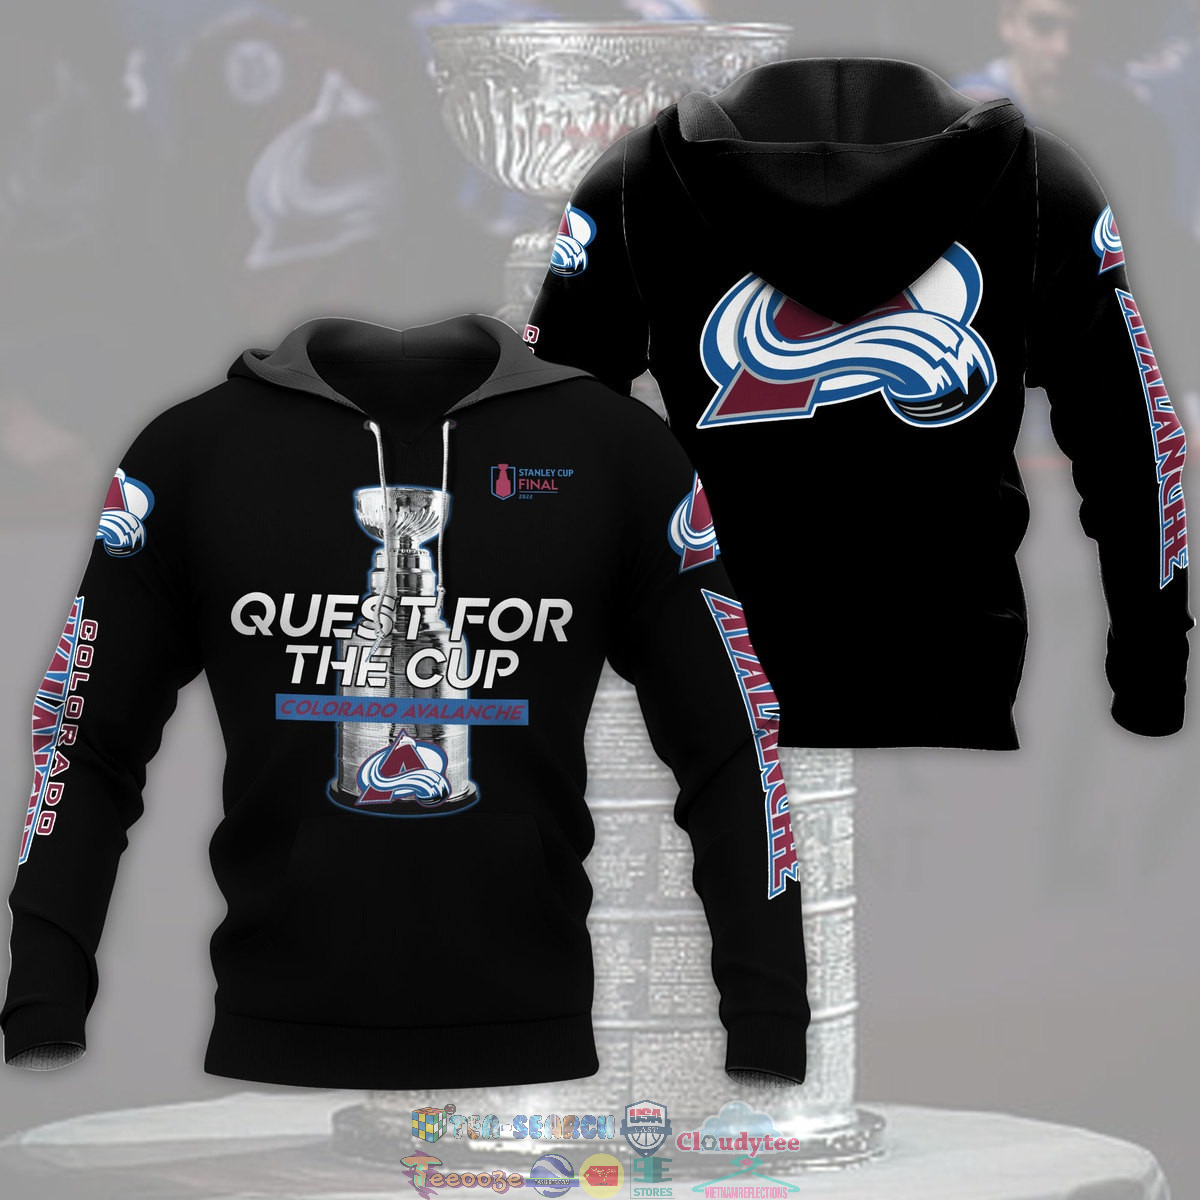 sU5BuAAT-TH060822-17xxxQuest-For-The-Cup-Colorado-Avalanche-Black-3D-hoodie-and-t-shirt3.jpg